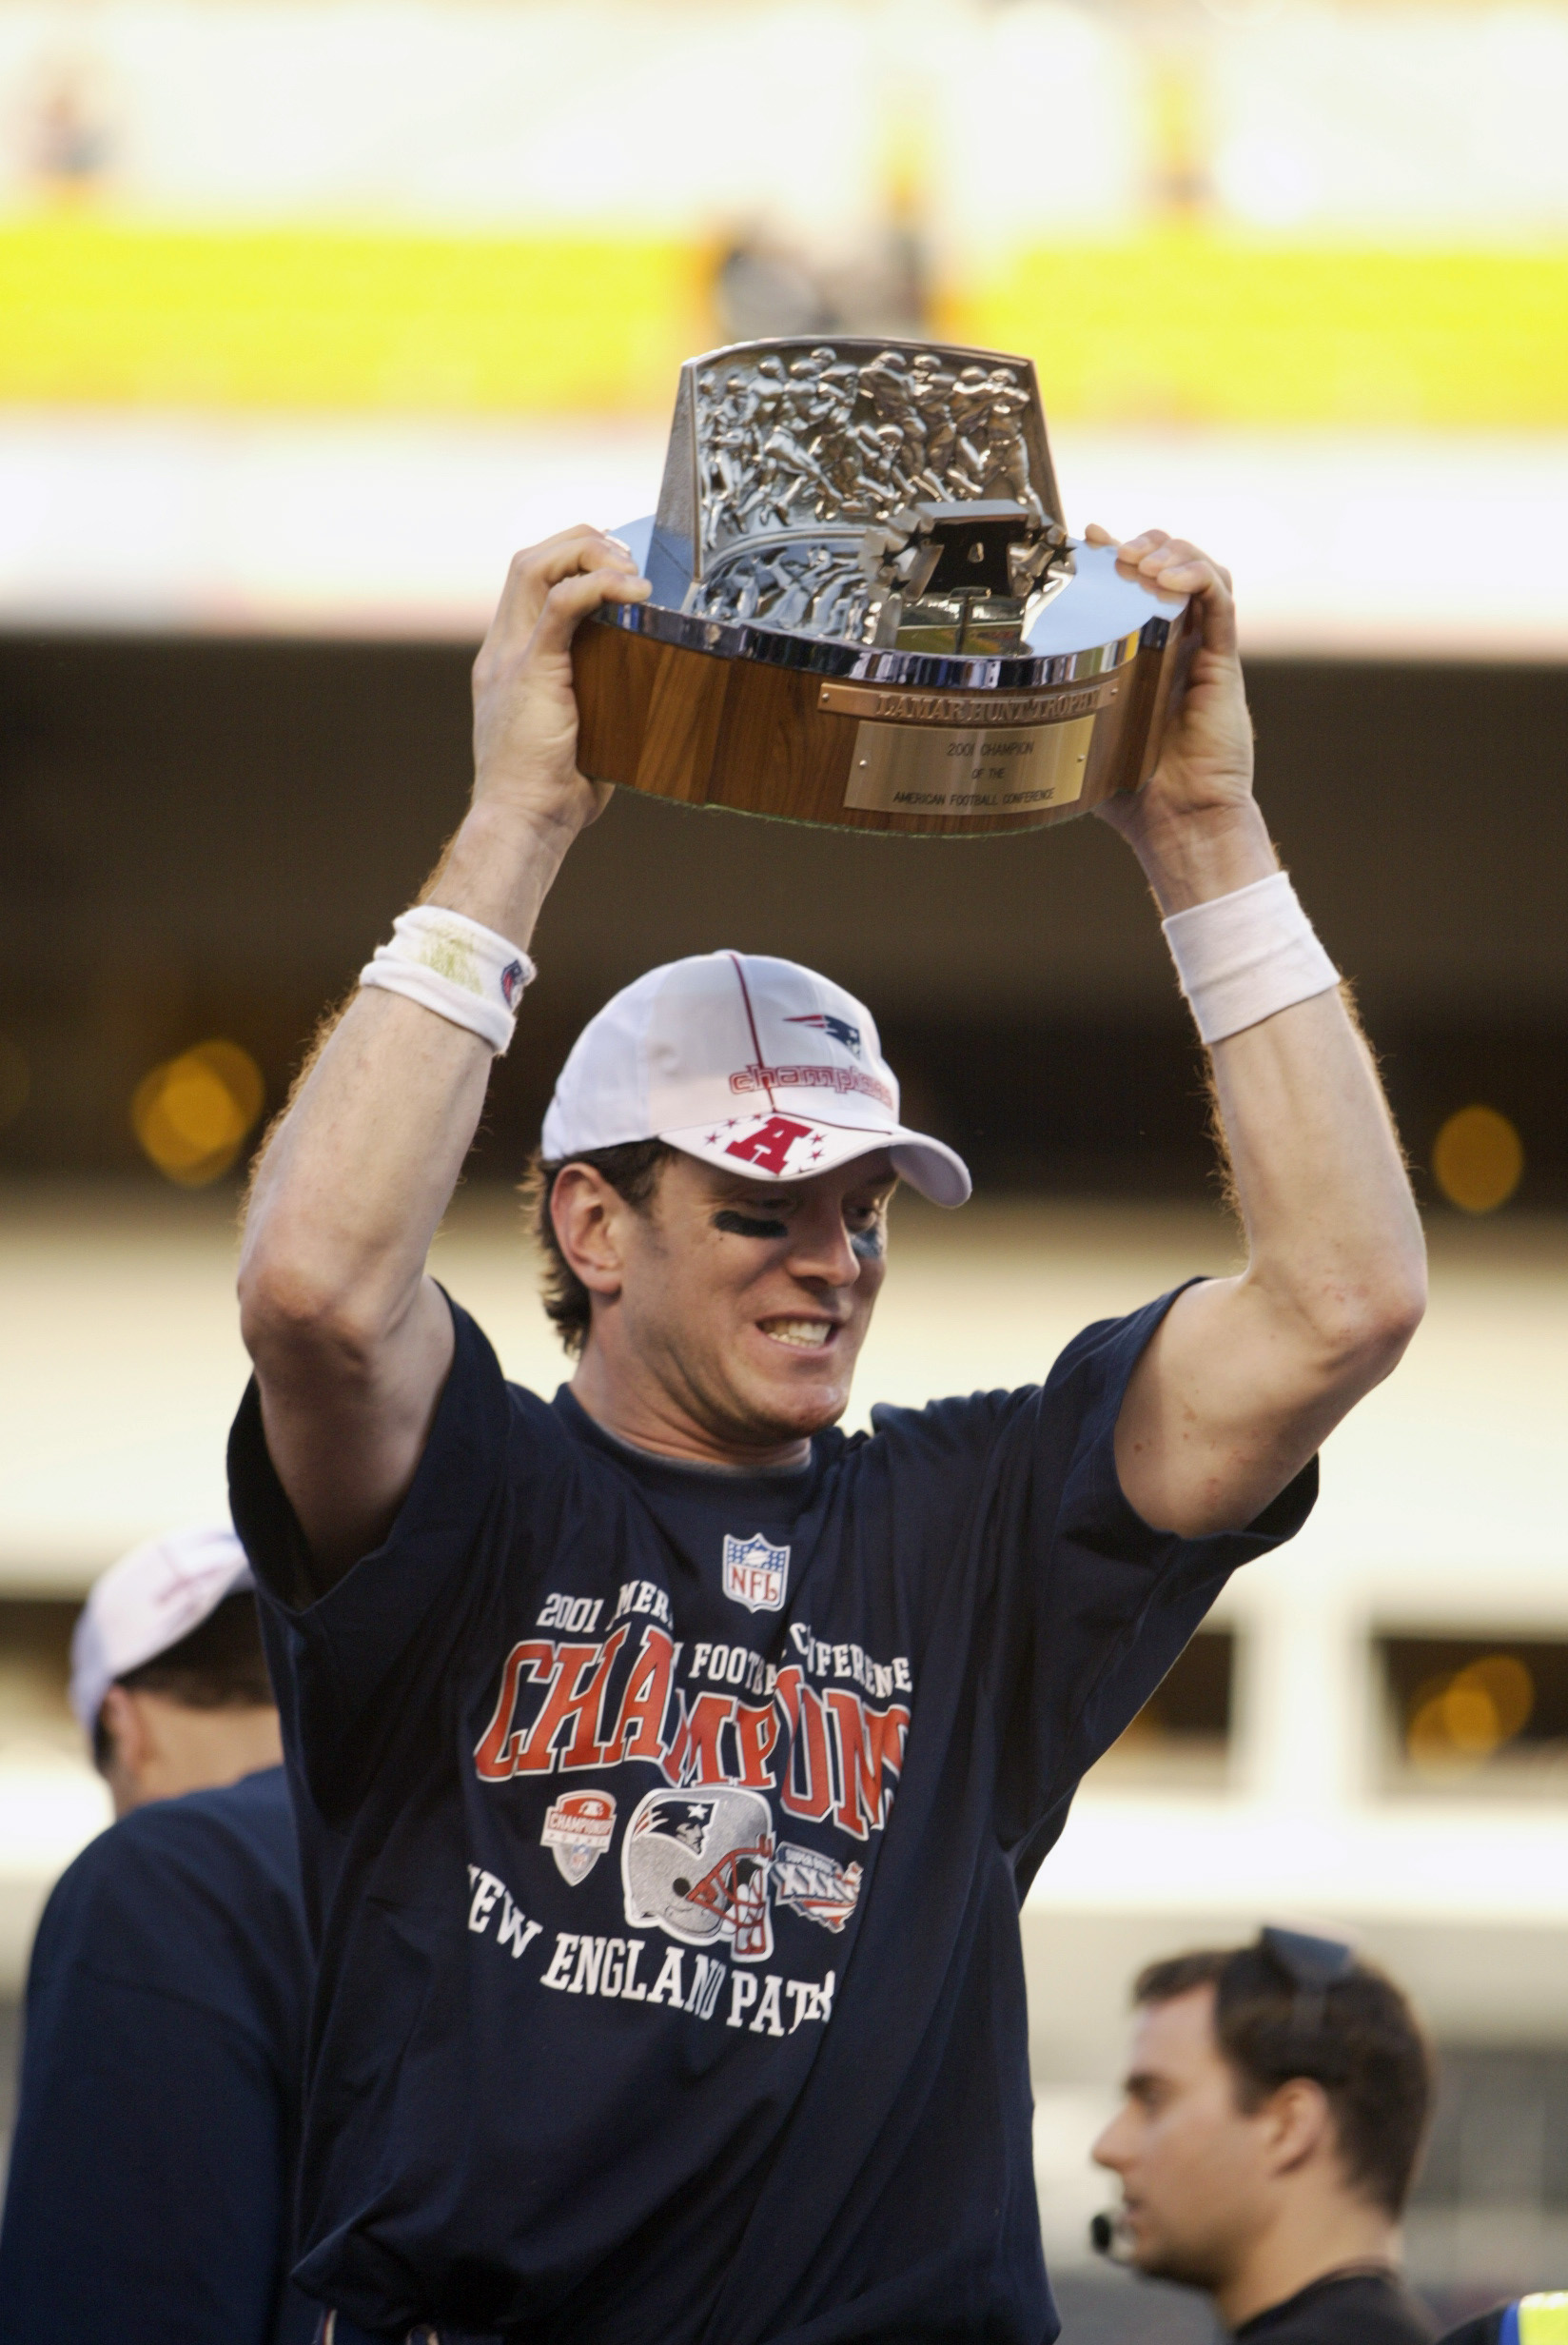 27 Jan 2002: Quarterback Drew Bledsoe of the New England Patriots presents the championship trophy after the AFC Championship Game against the Pittsburgh Steelers at Heinz Field in Pittsburgh, Pennsylvania. The Patriots won 24-17. DIGITAL IMAGE. Mandatory